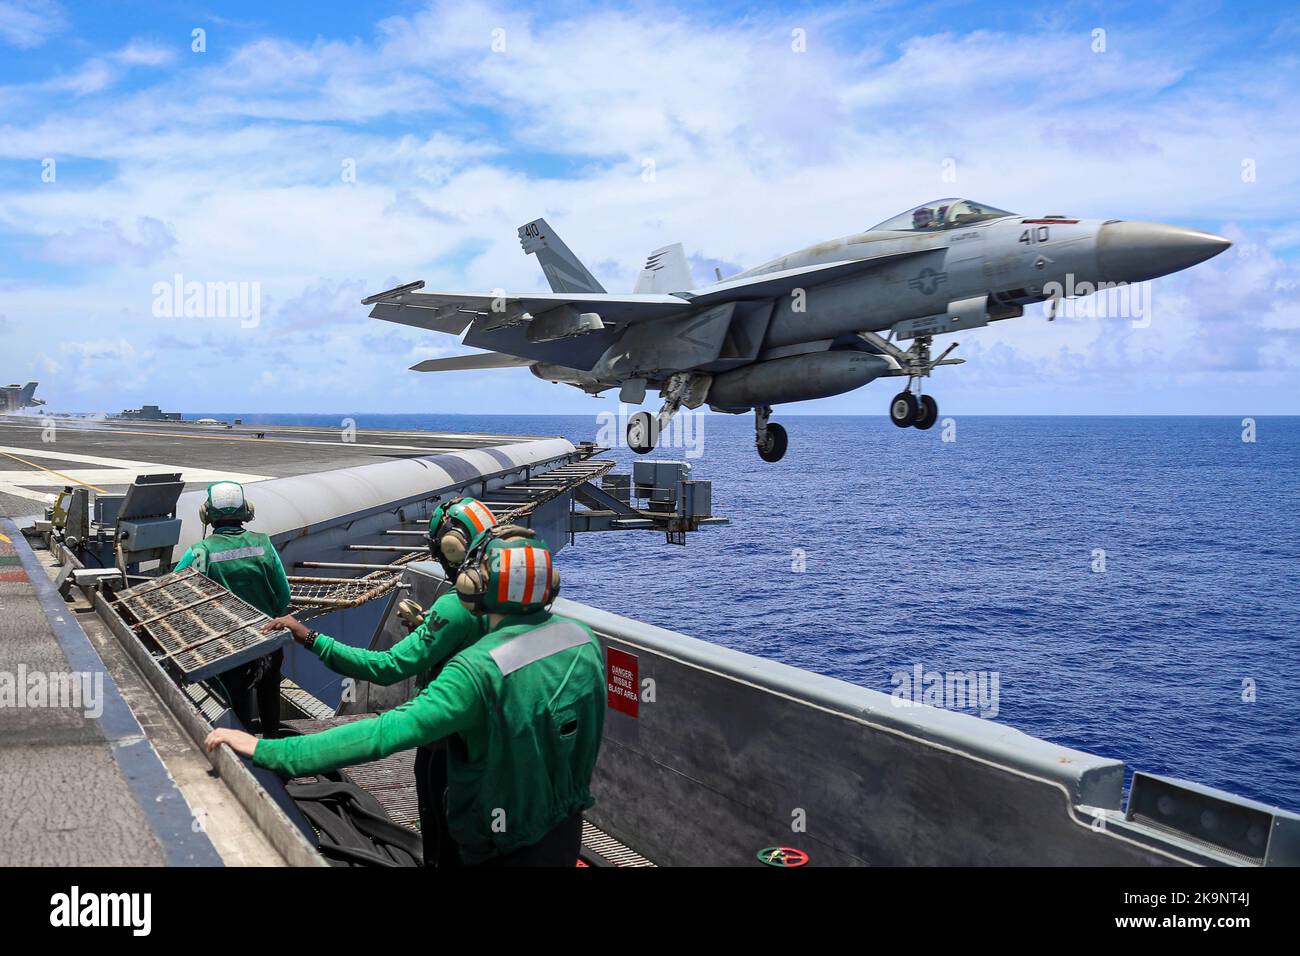 An F/A-18E Super Hornet assigned to the “Vigilantes” of Strike Fighter Squadron (VFA) 151 launches from the flight deck of the Nimitz-class aircraft carrier USS Abraham Lincoln (CVN 72) while the ship is underway Stock Photo